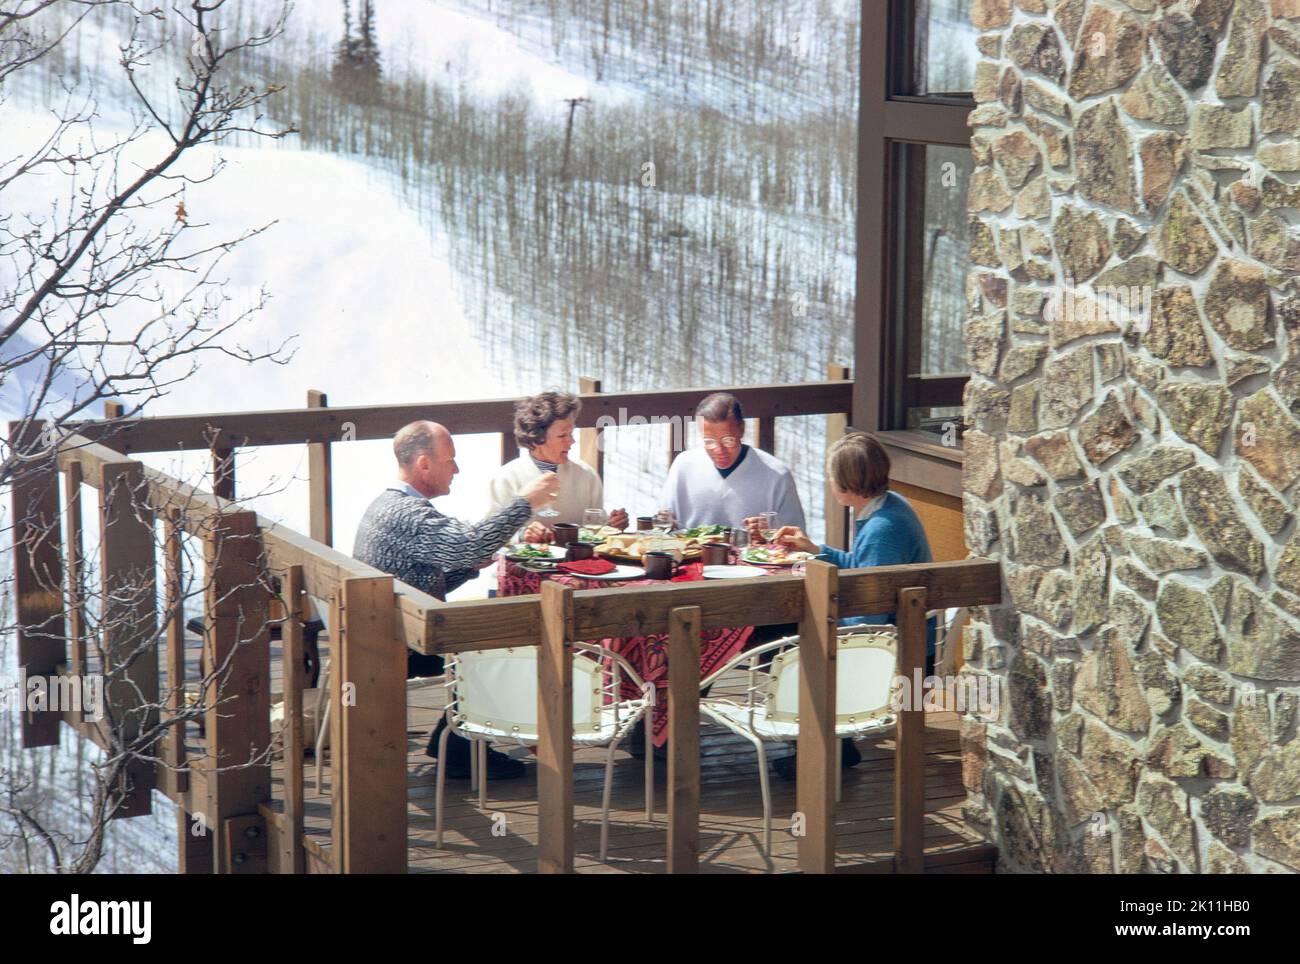 Former U.S. Secretary of Defense Robert McNamara with his wife Margaret and unidentified couple having lunch on Balcony, Snowmass Village, Colorado, USA, Toni Frissell Collection, February 1969 Stock Photo